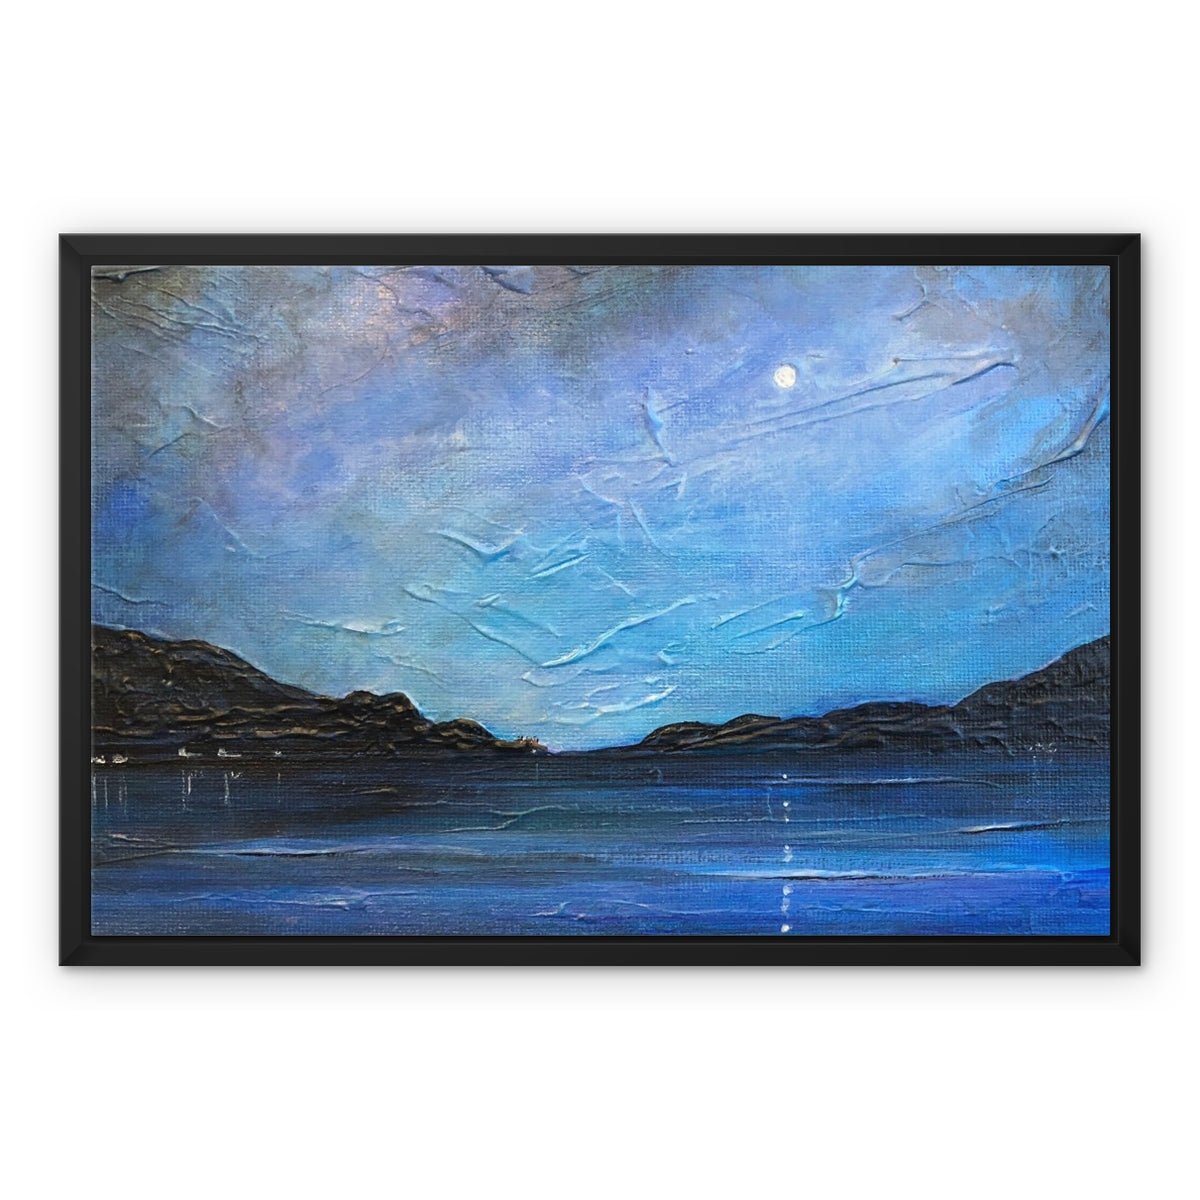 Loch Ness Moonlight Painting | Framed Canvas-Floating Framed Canvas Prints-Scottish Lochs & Mountains Art Gallery-24"x18"-Black Frame-Paintings, Prints, Homeware, Art Gifts From Scotland By Scottish Artist Kevin Hunter